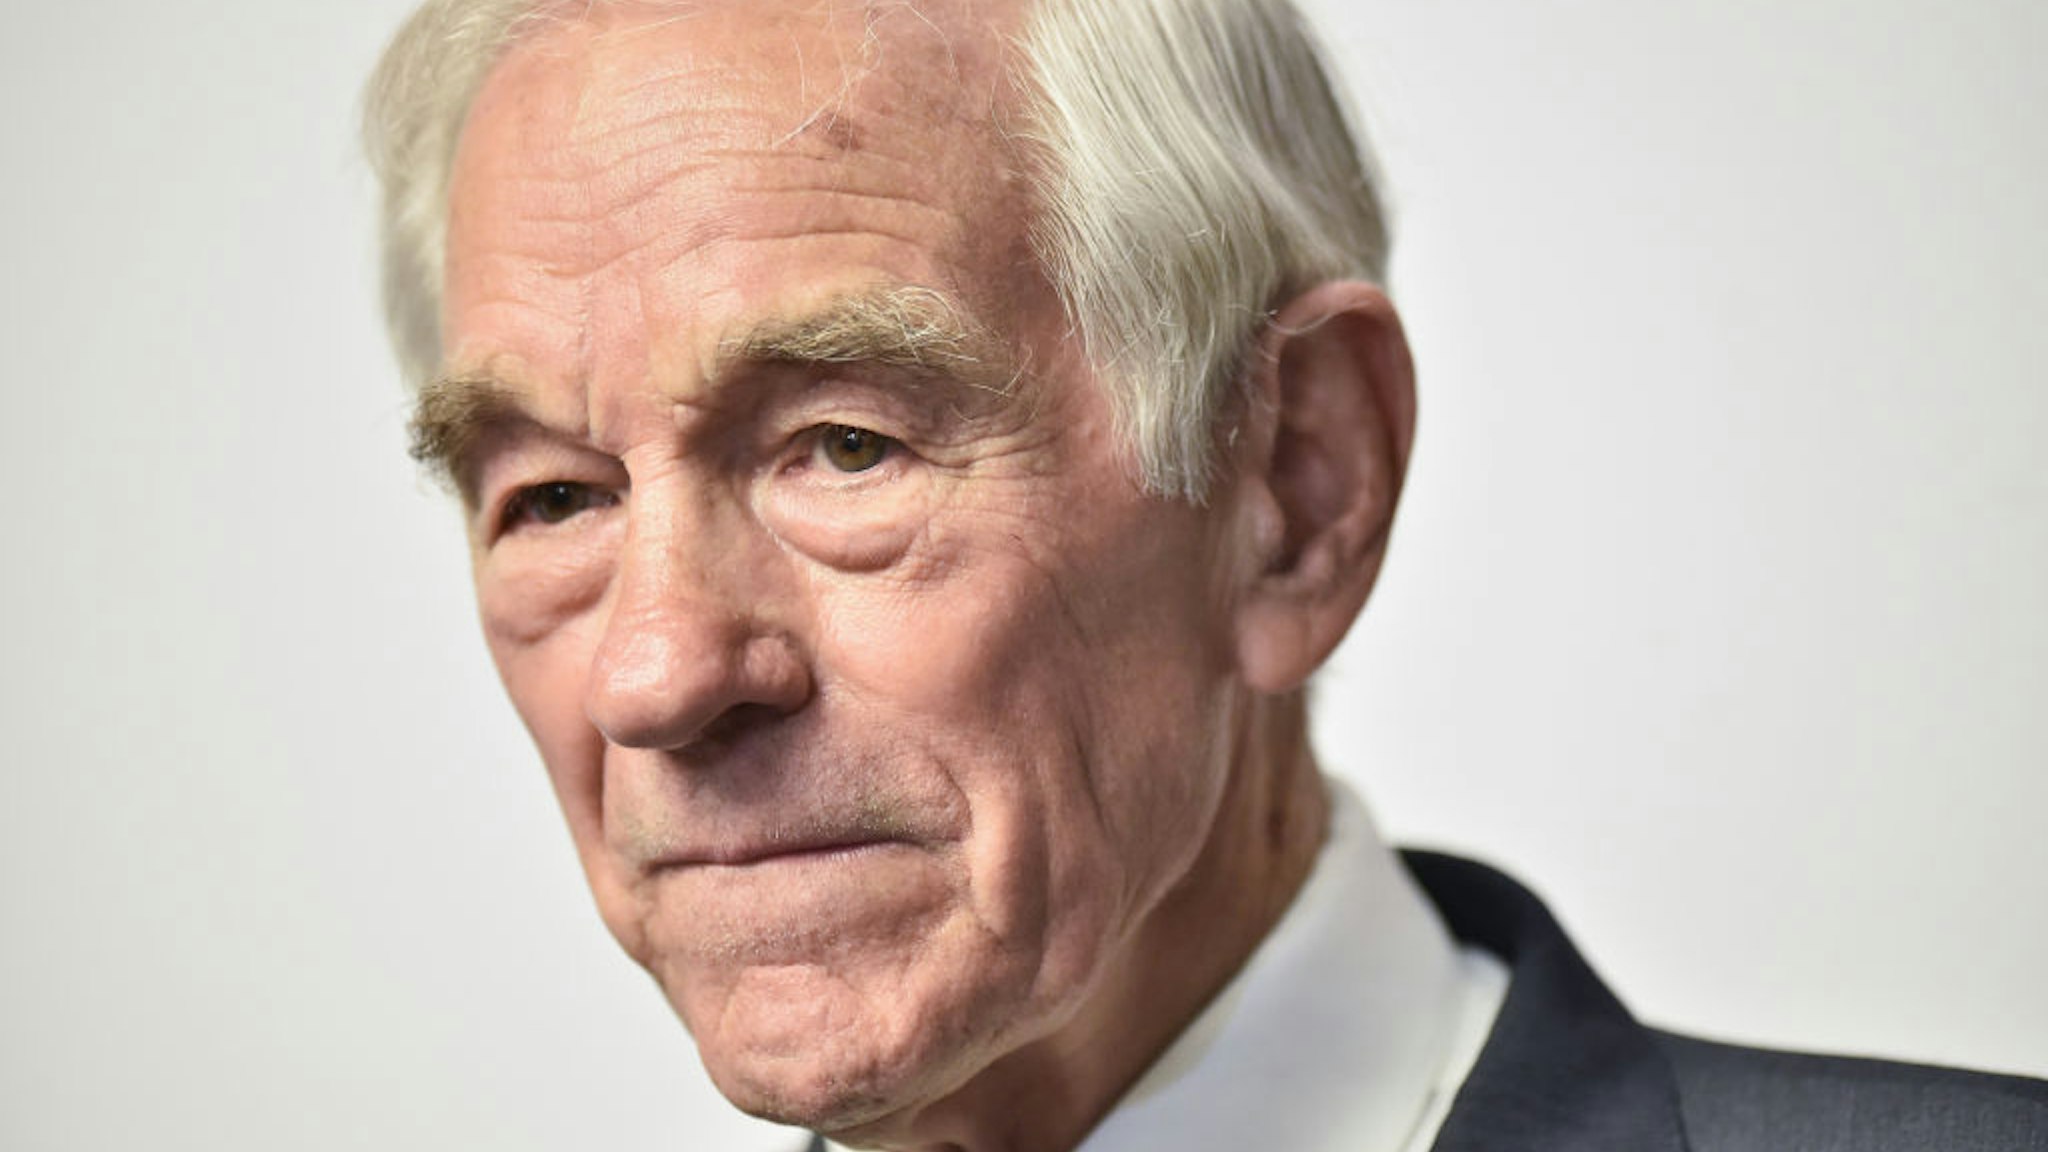 Texas Congressman Ron Paul attends Consensus 2019 at the Hilton Midtown on May 13, 2019 in New York City.